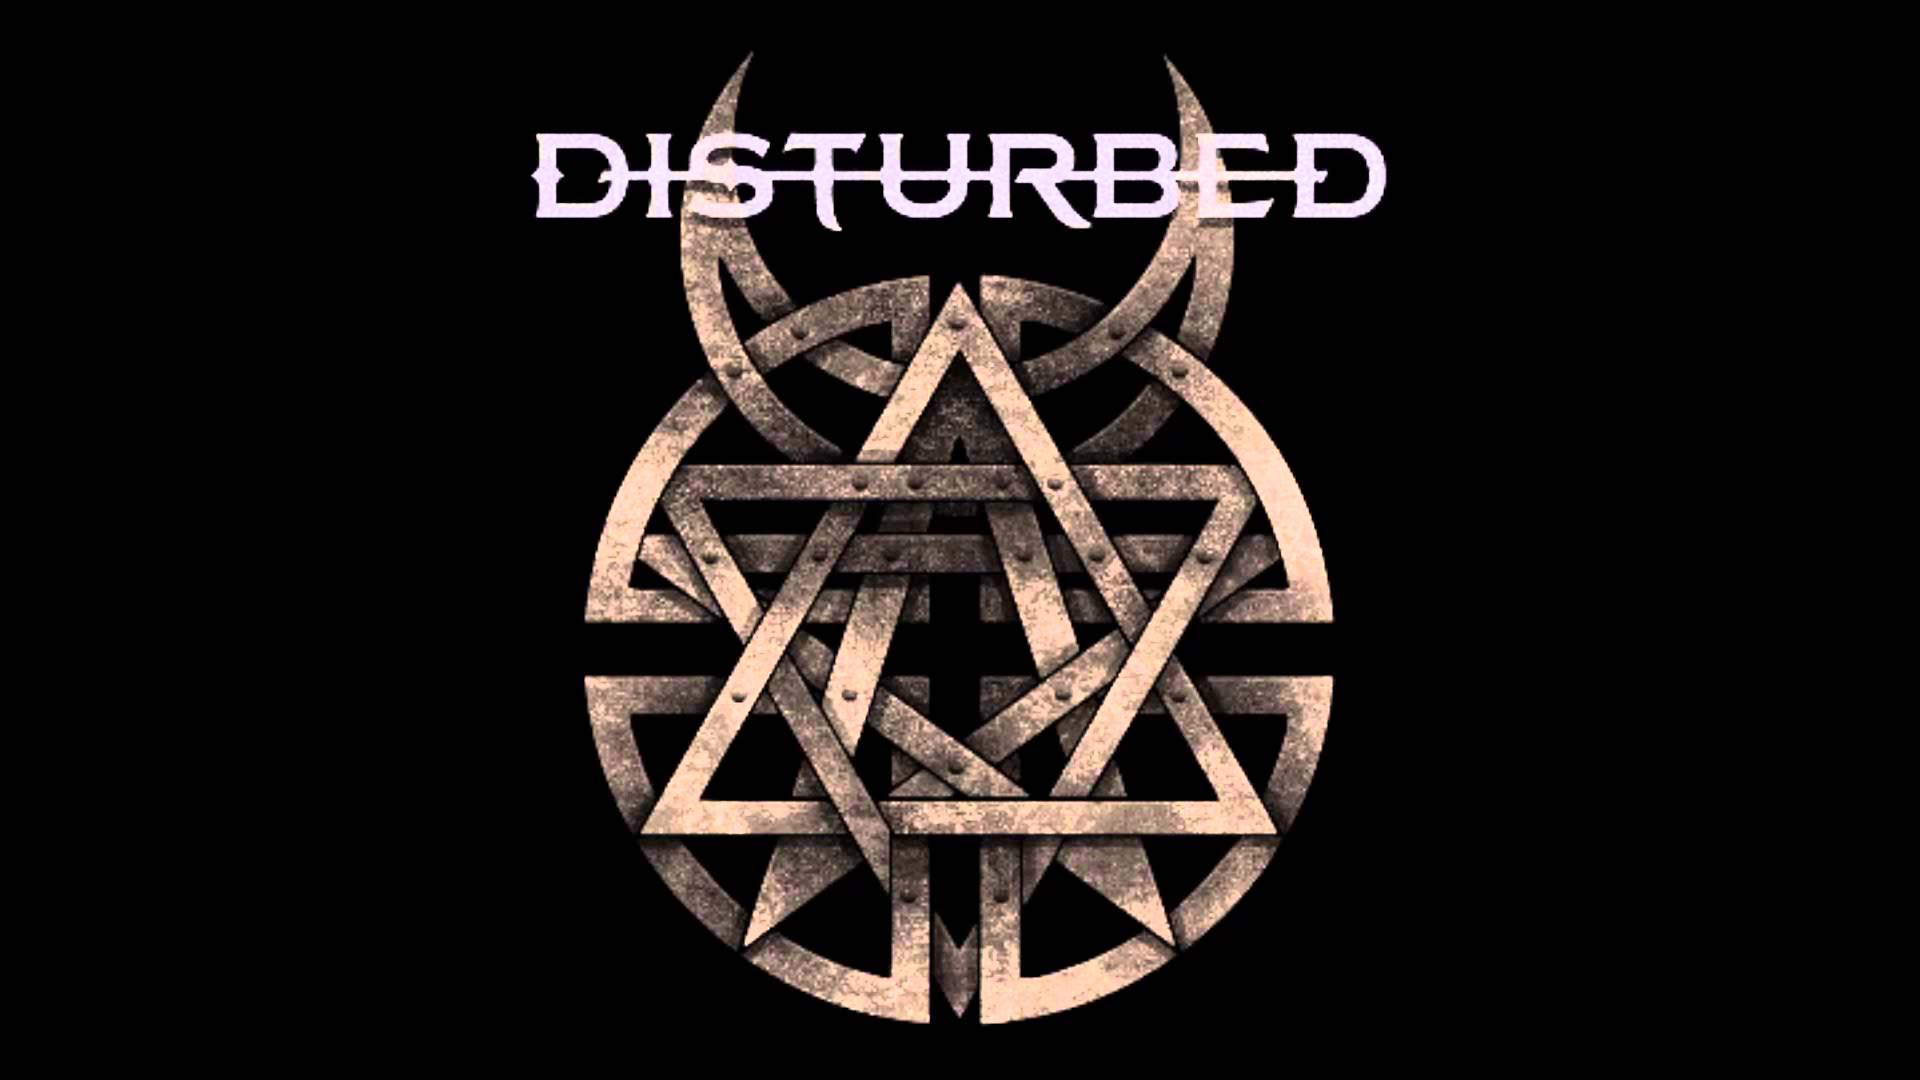 Disturbed Logo - Heavy Metal images Disturbed logo HD wallpaper and background photos ...